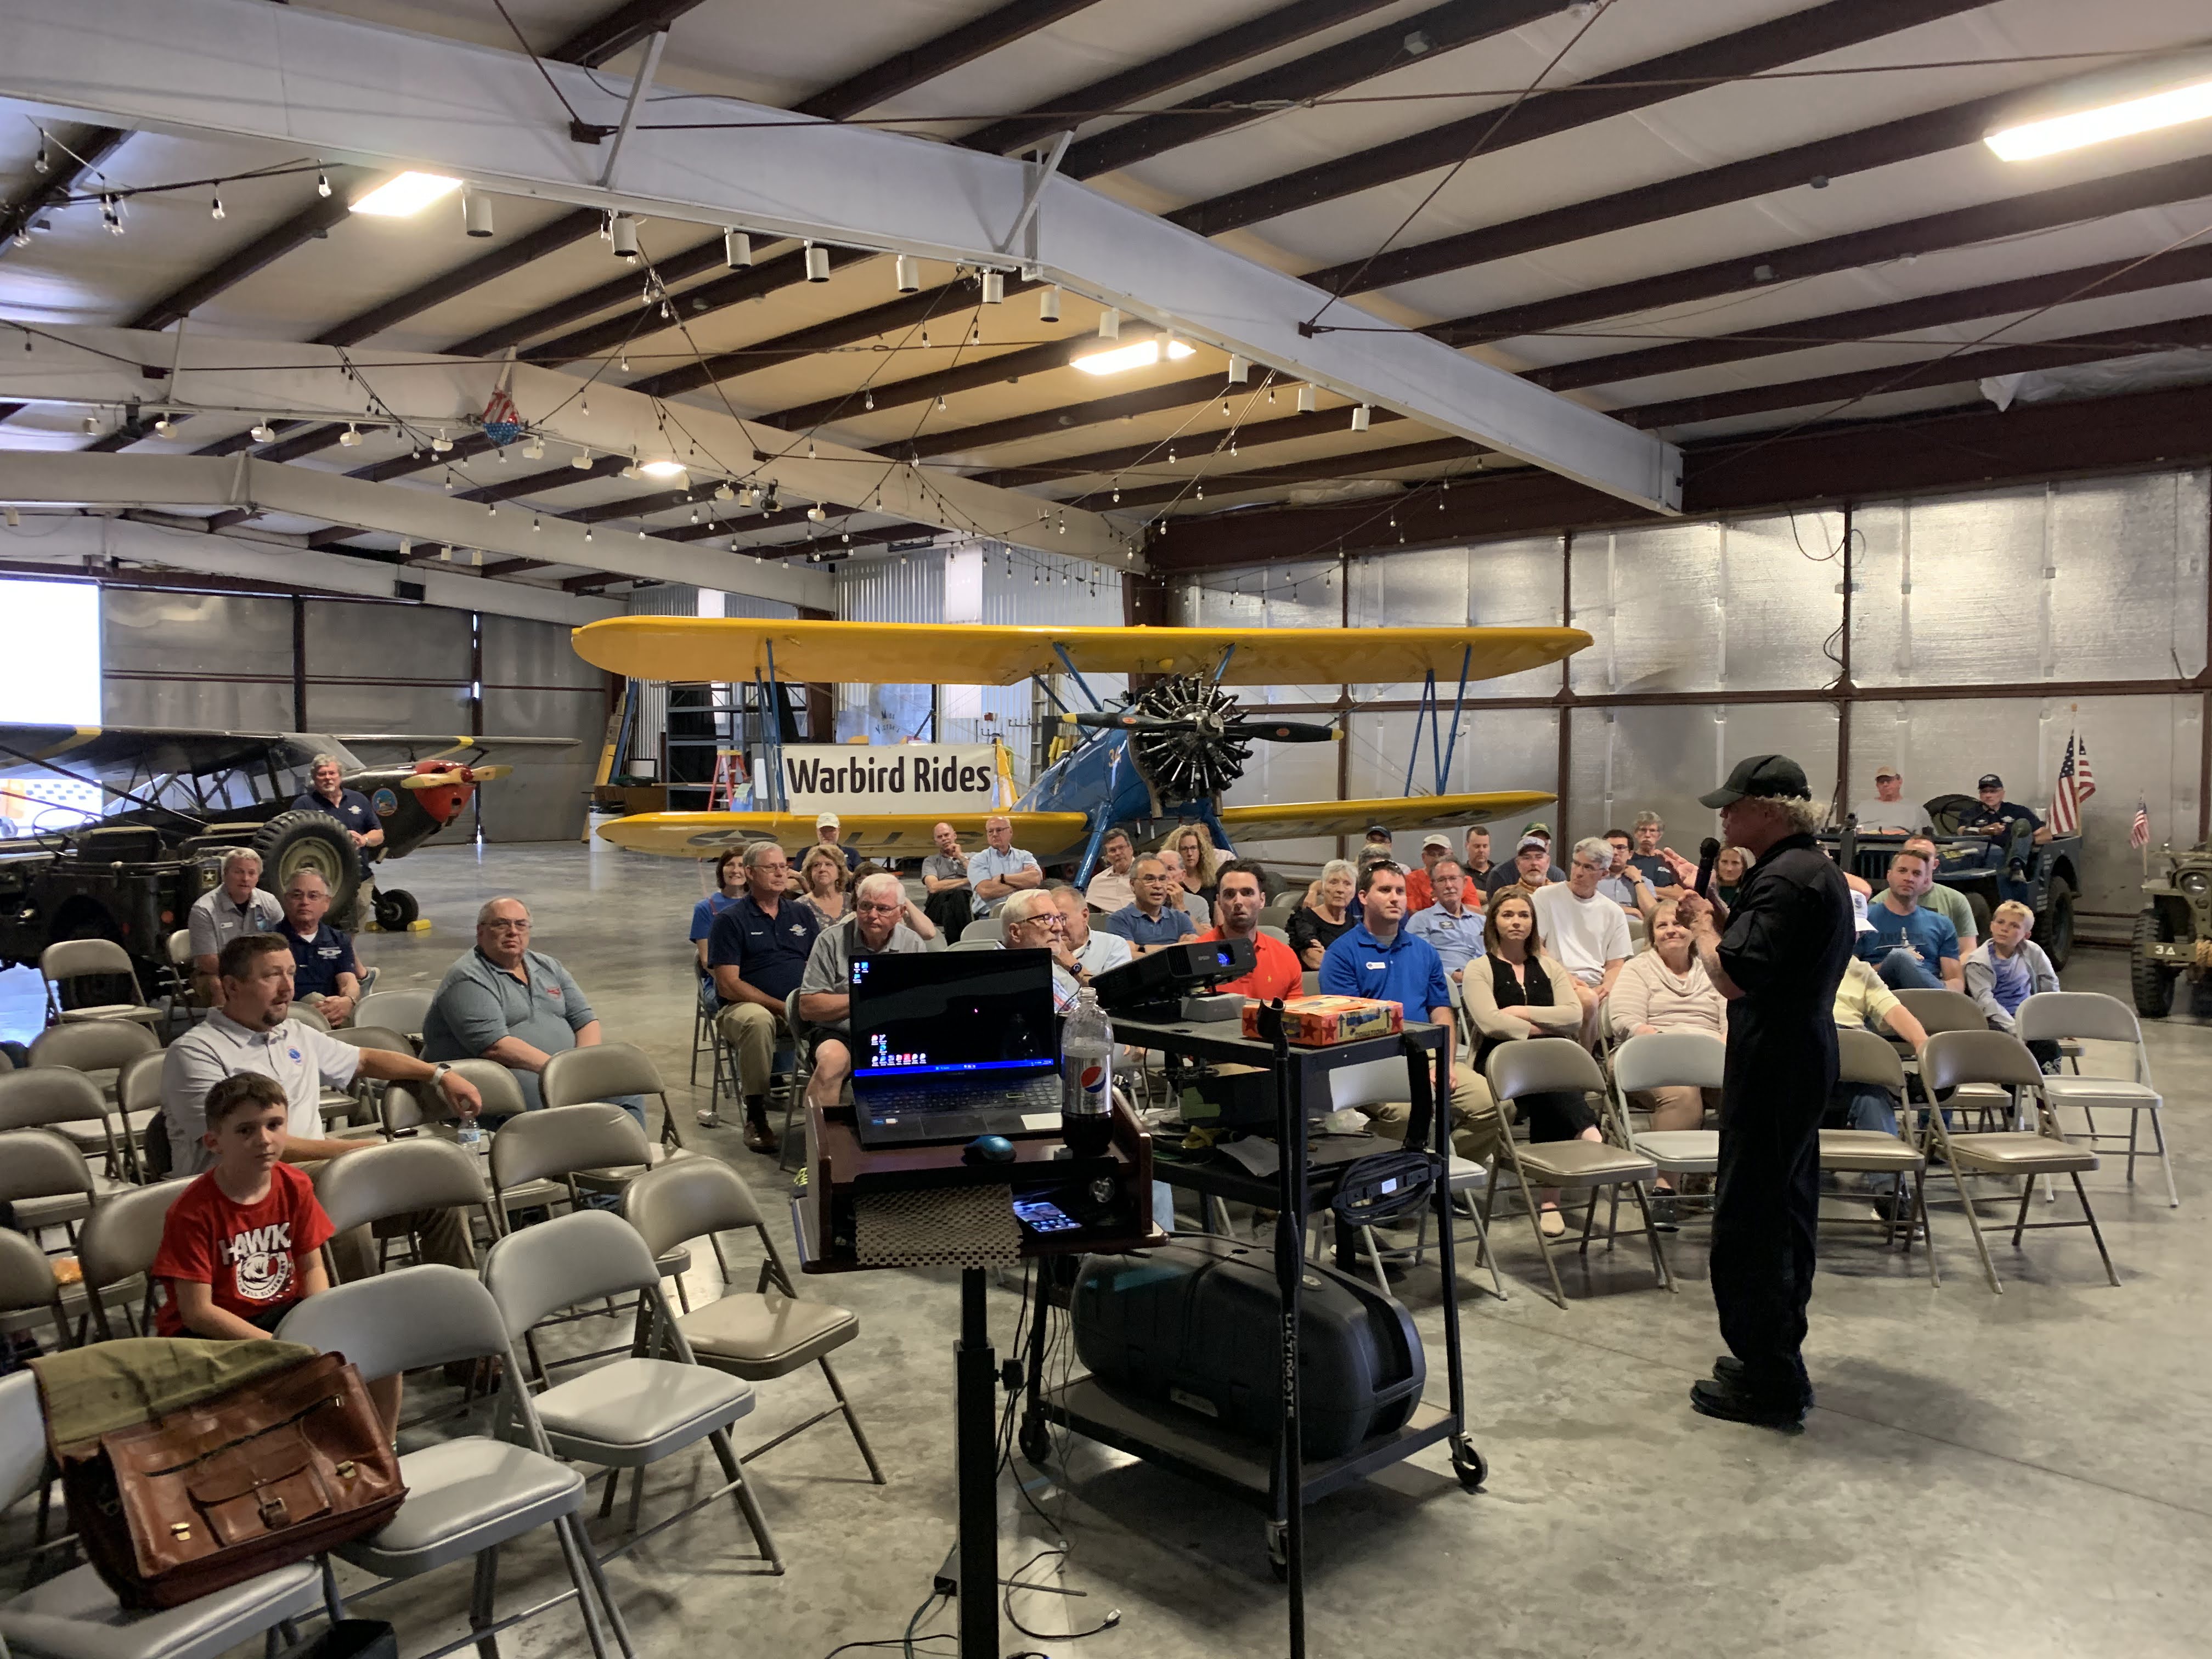 A person speaking to a group of people in a room with a plane.